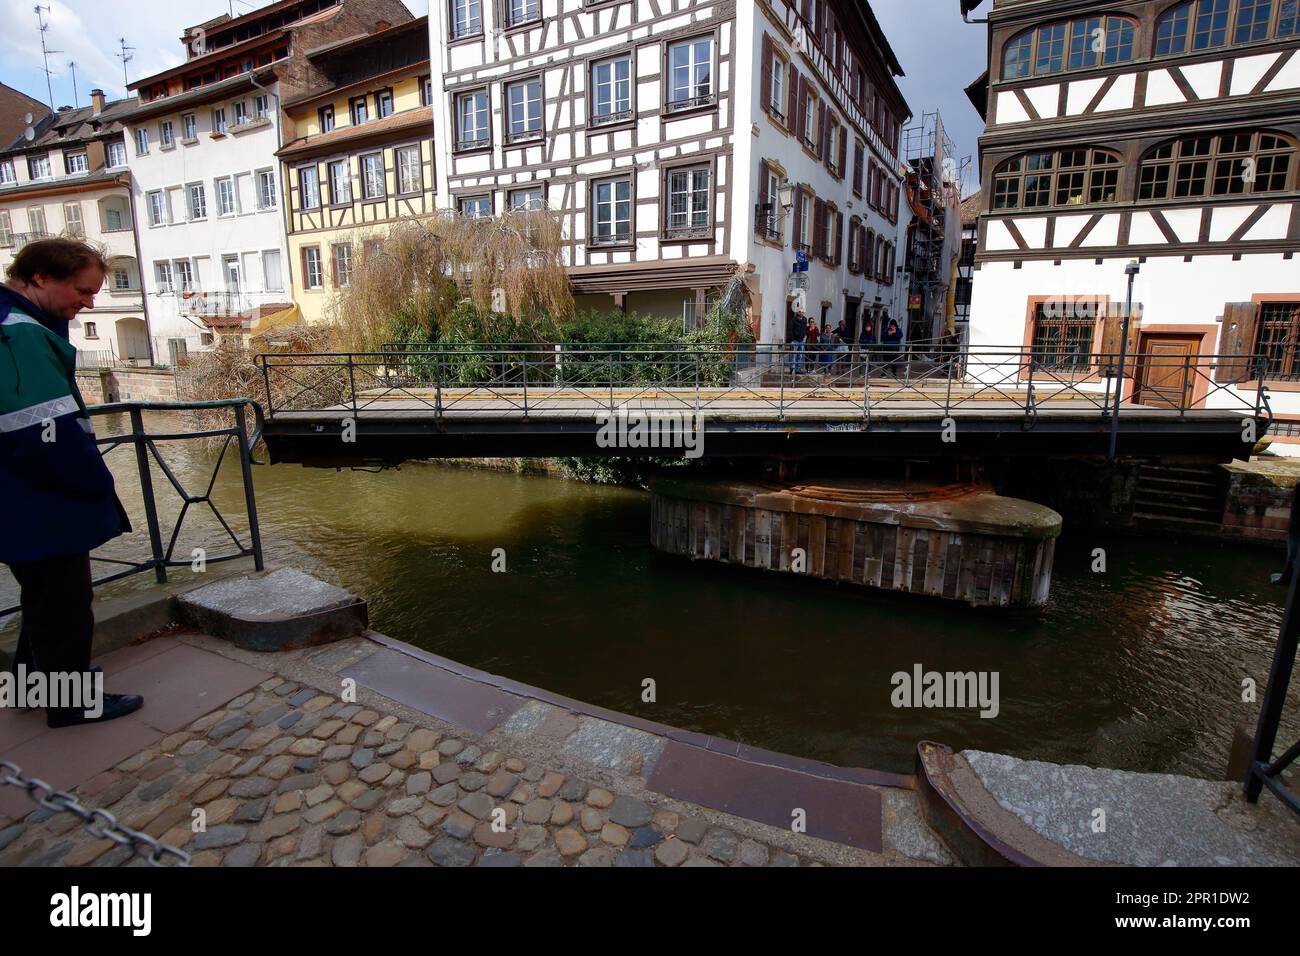 People wait to cross Pont du Faisan while in the open position. The bridge is a hydraulic, or swing bridge over the Ill River in Strasbourg, France. Stock Photo